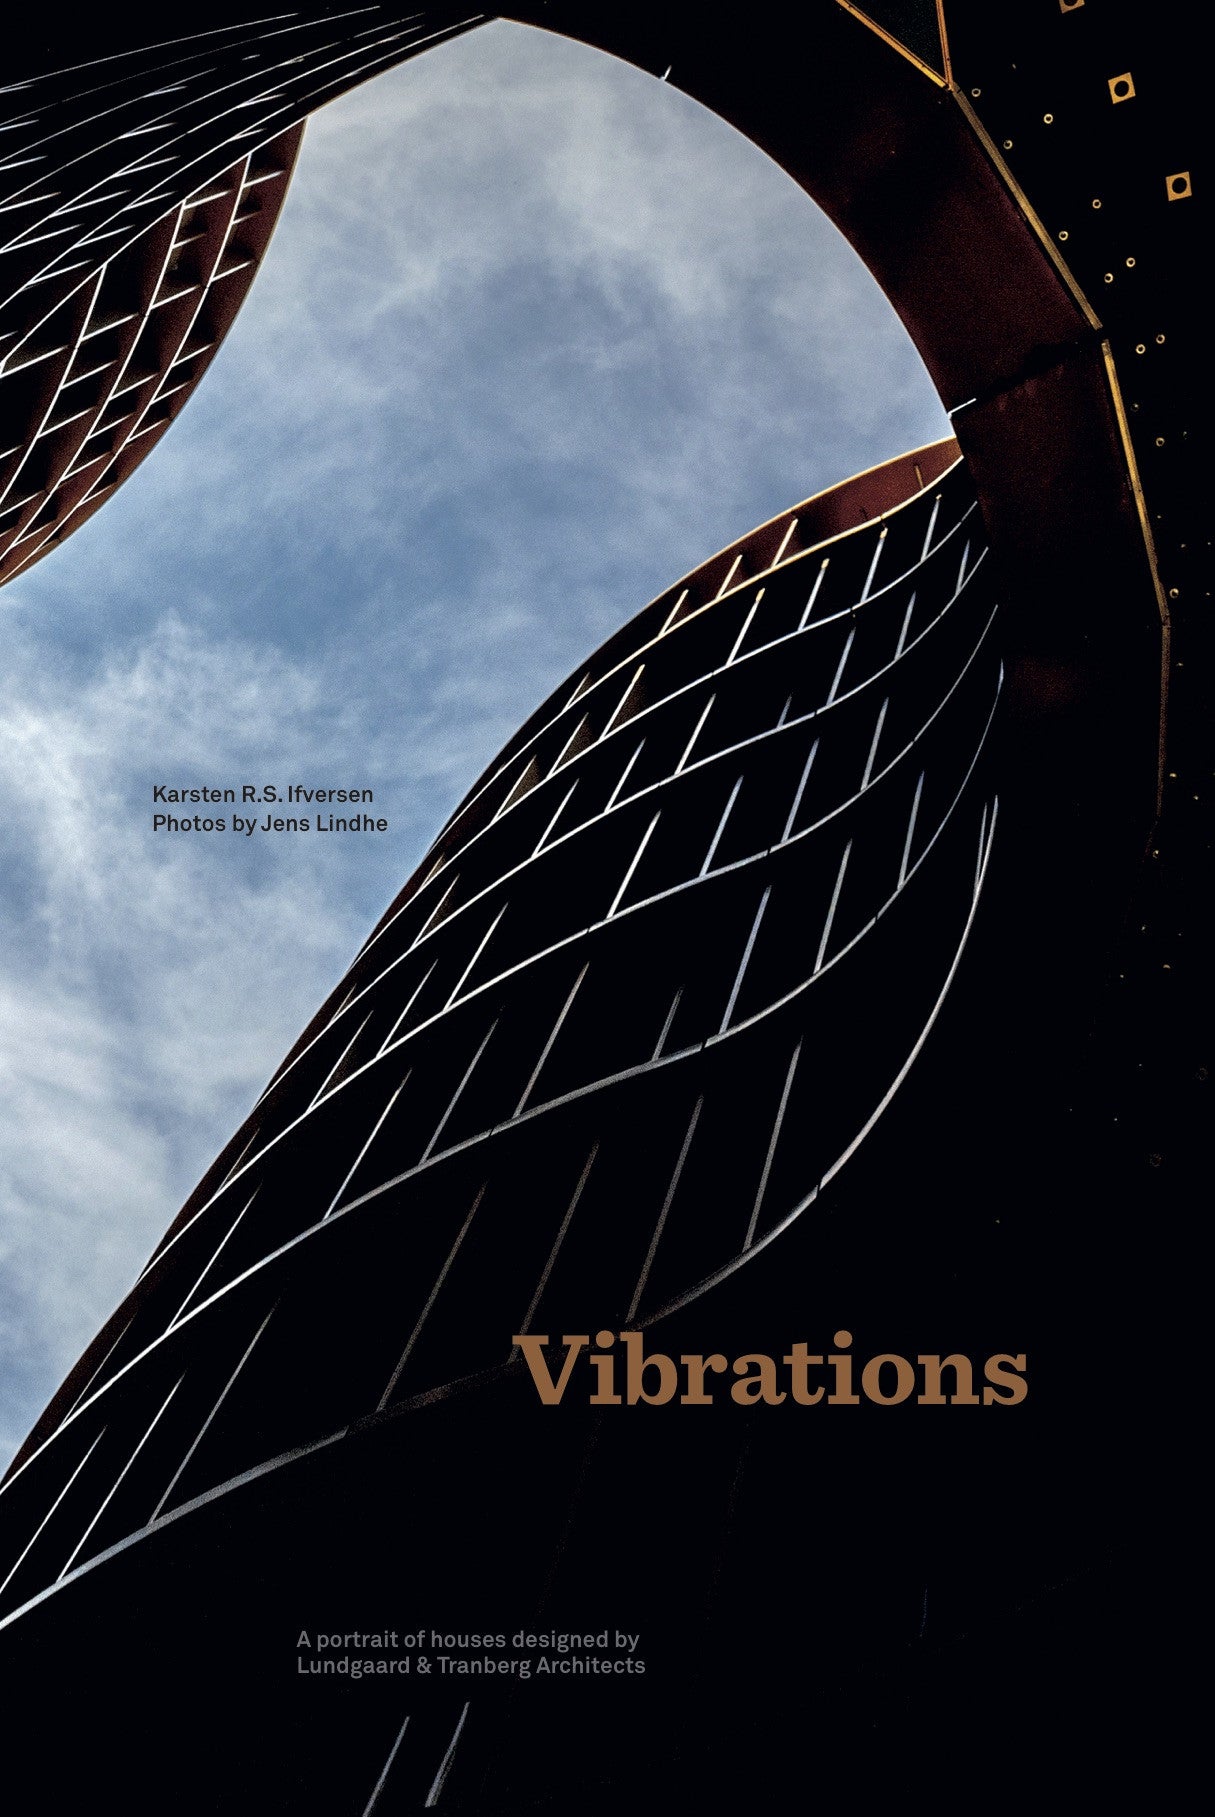 Vibrations – A portrait of houses designed by Lundgaard & Tranberg Architects